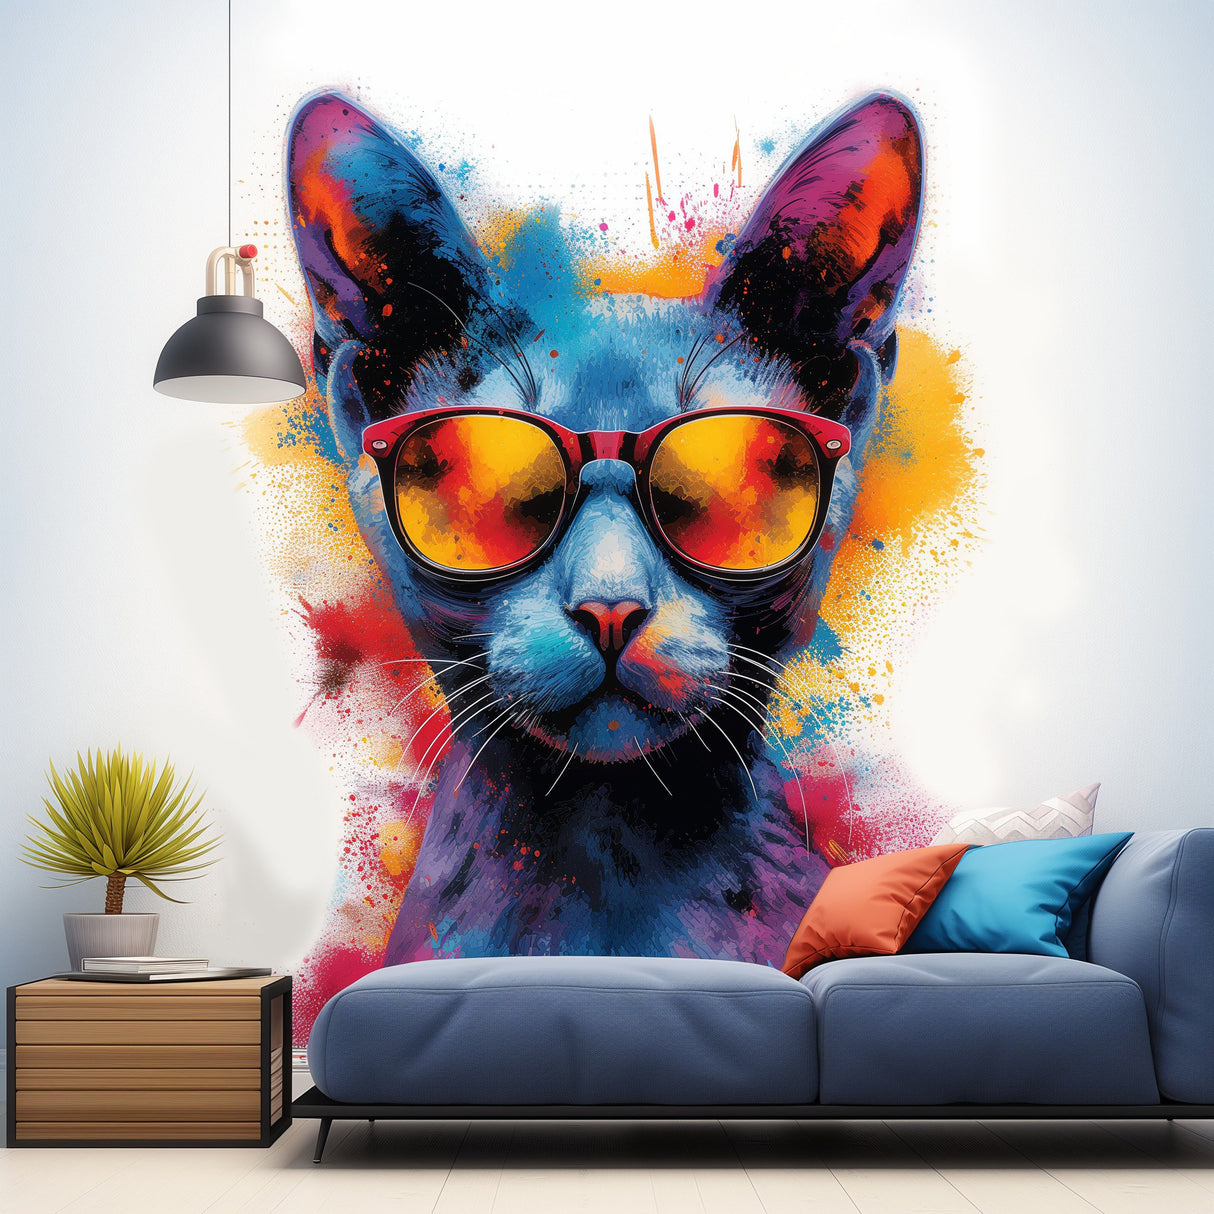 Colorful Watercolor Cat in Glasses Wall Decal - Vibrant Kitten Room Sticker Decor